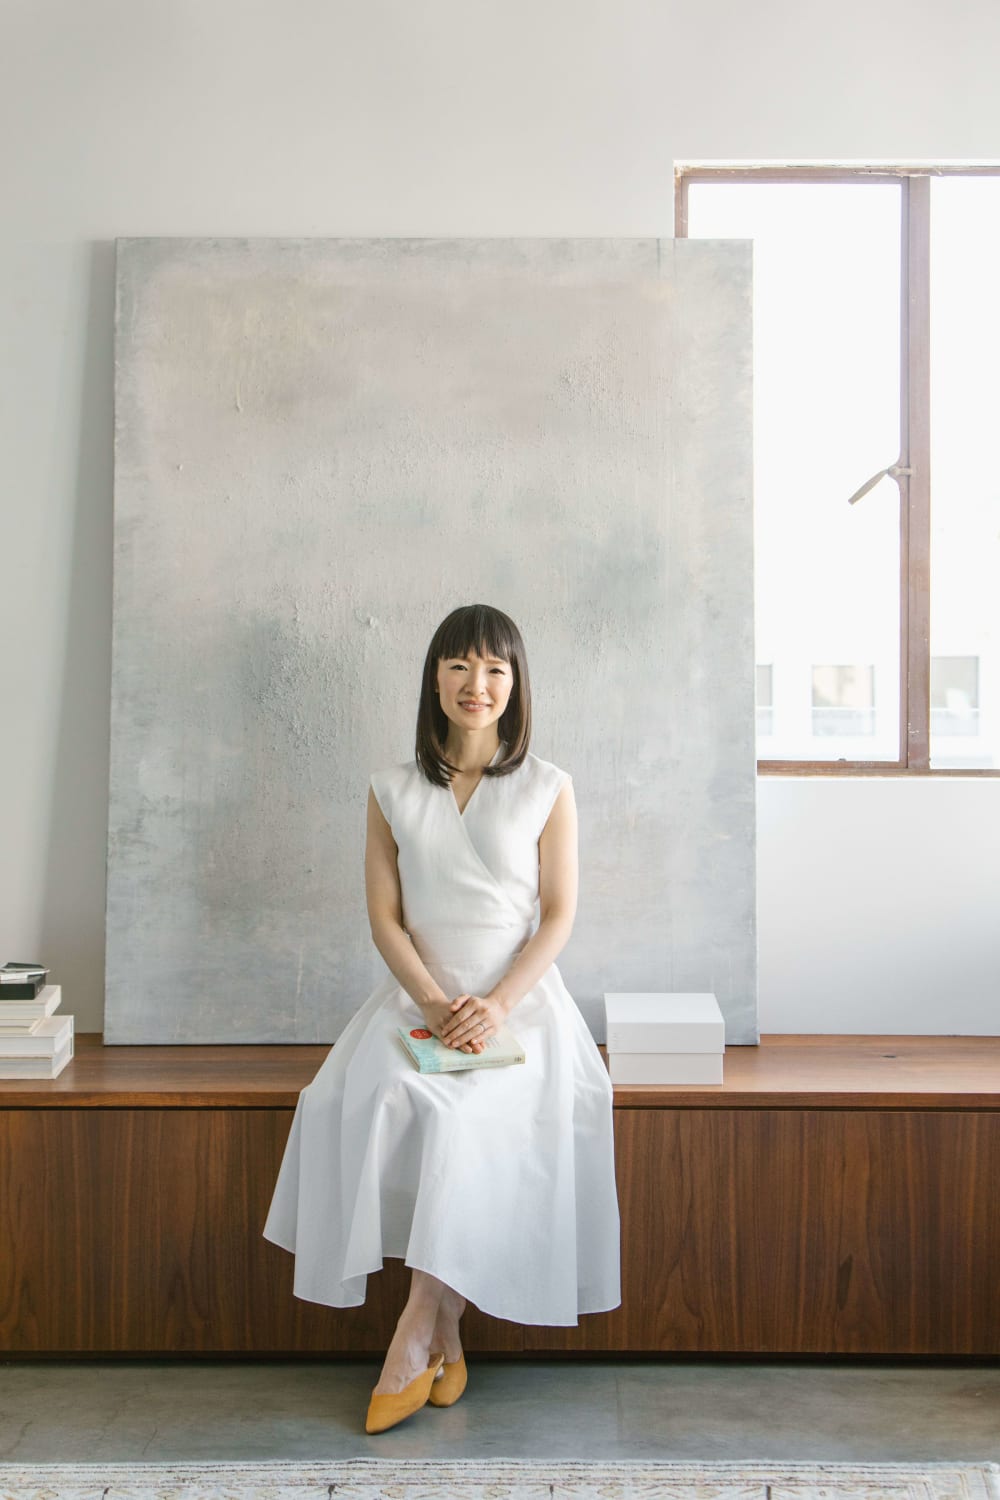 4 tips for turning your home into a productive work space, according to tidying expert Marie Kondo